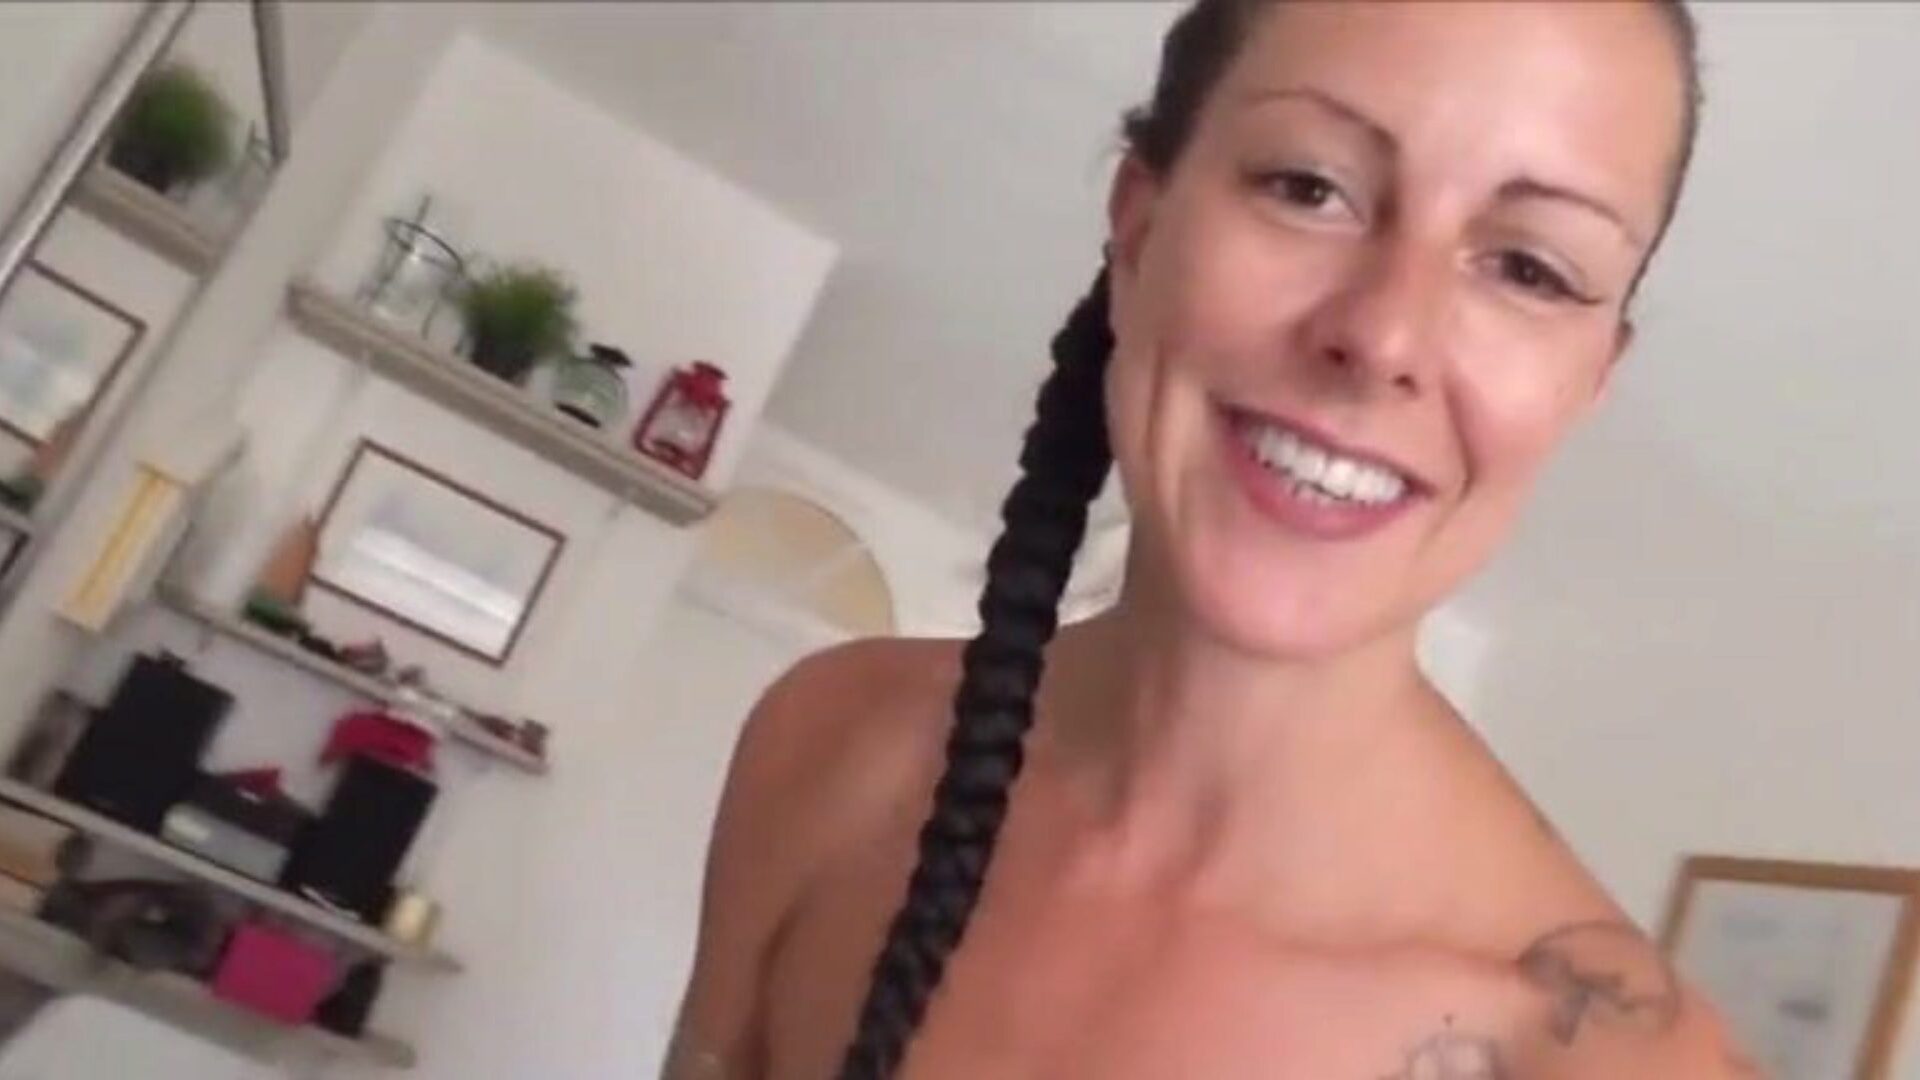 Texas Patti German mother I'd like to pulverize Pornstar at Real Fan Fuck Date